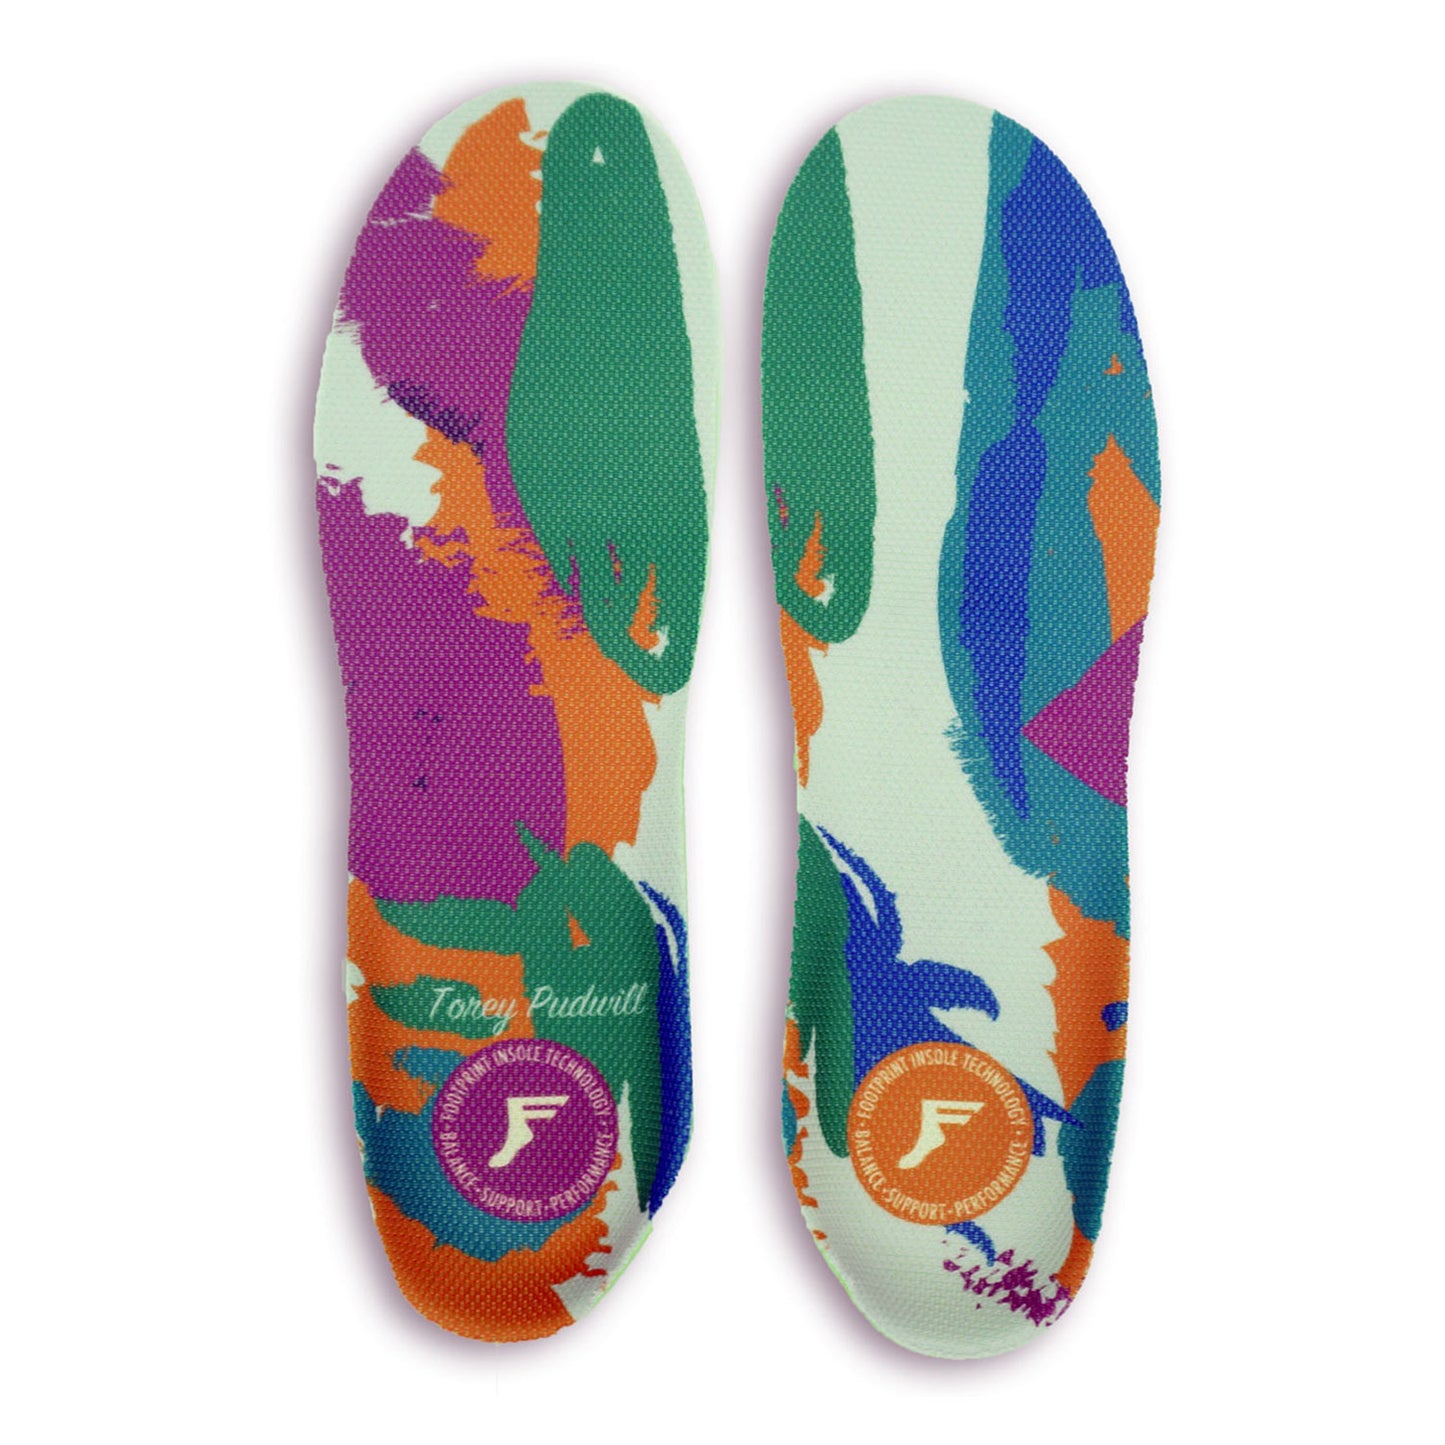 torey pudwill fp insoles 